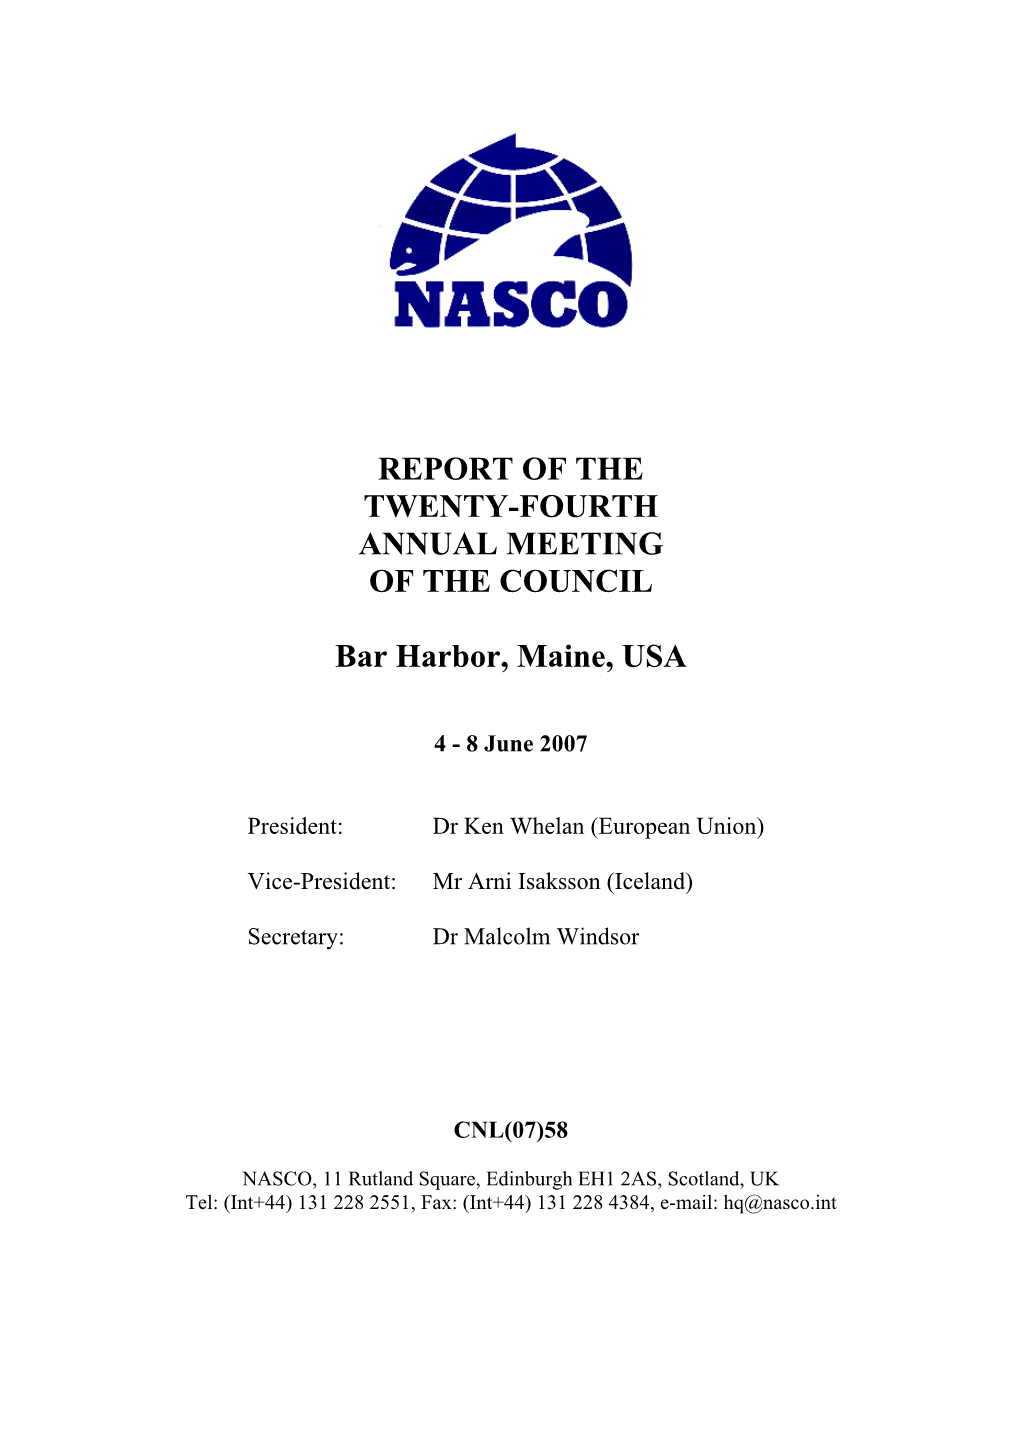 Report of the Twenty-Fourth Annual Meeting of the Council